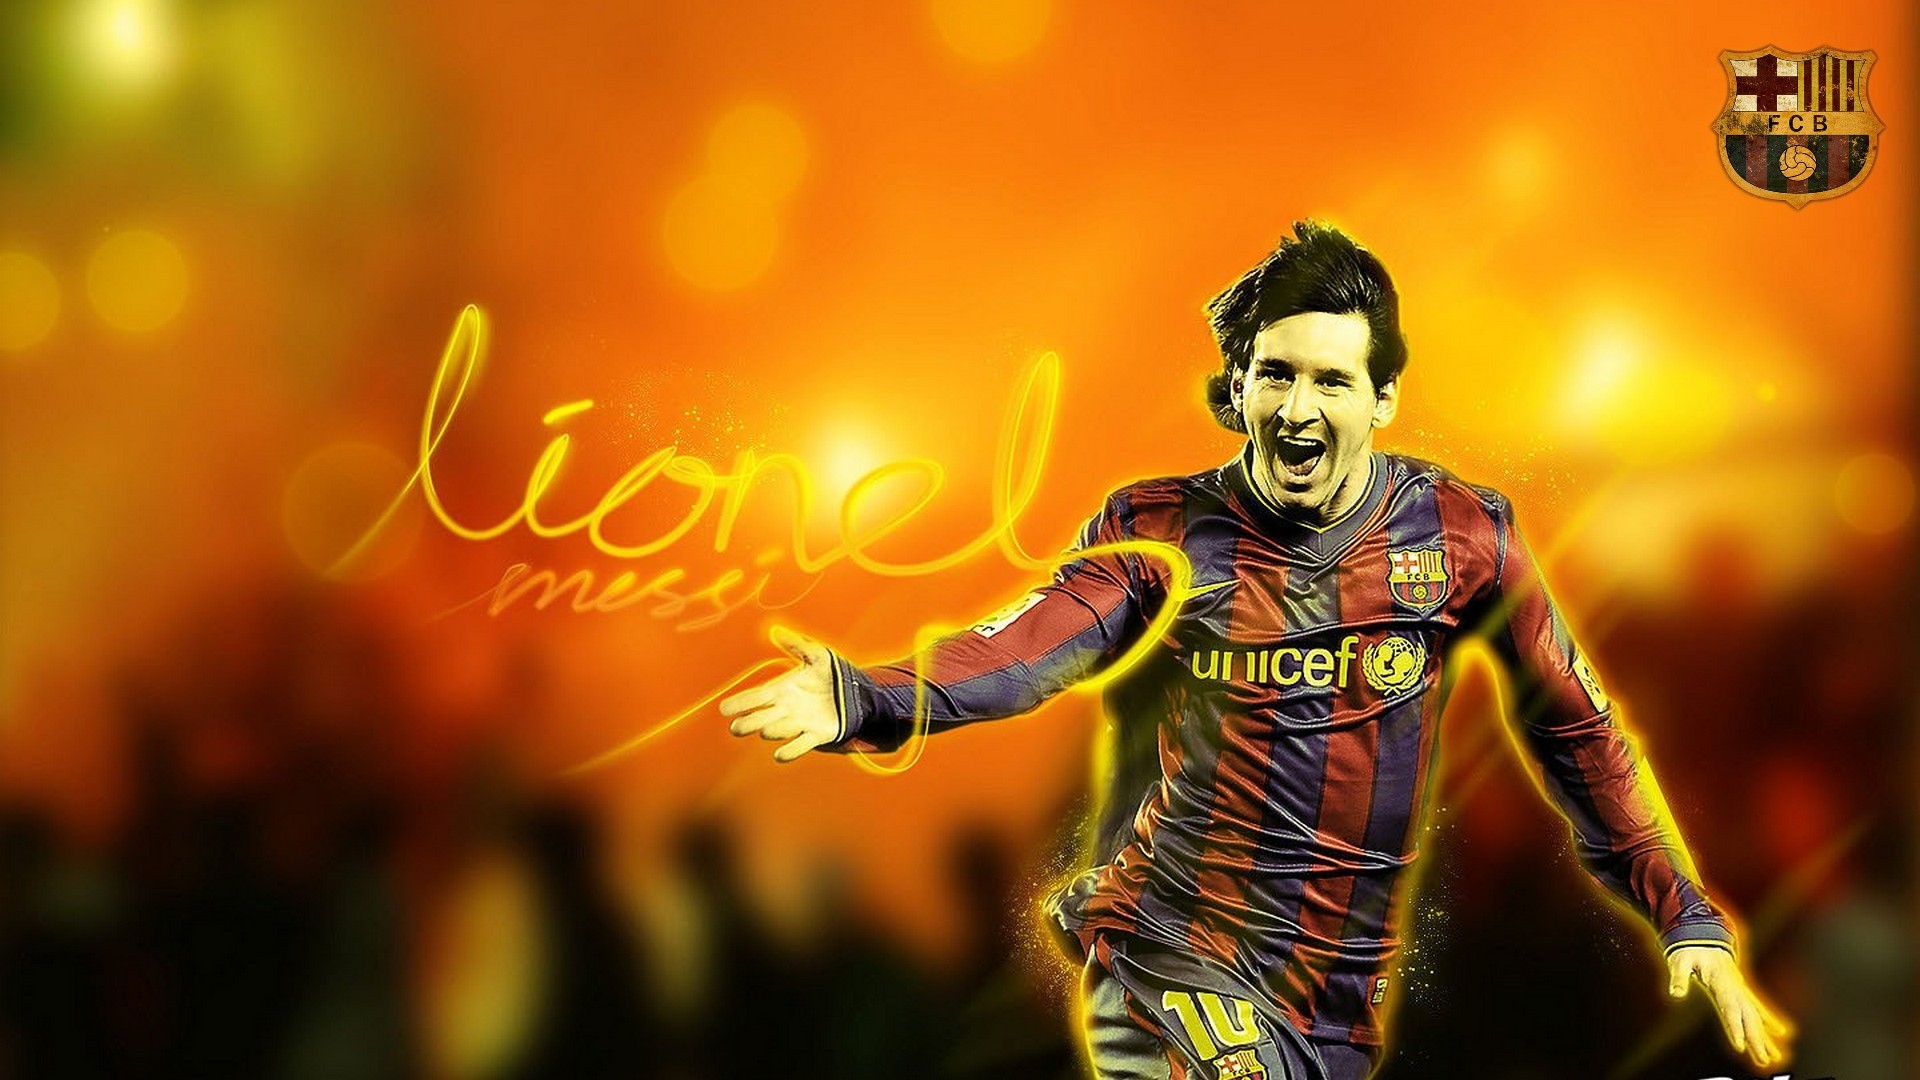 Windows Wallpaper Leo Messi with resolution 1920x1080 pixel. You can make this wallpaper for your Mac or Windows Desktop Background, iPhone, Android or Tablet and another Smartphone device